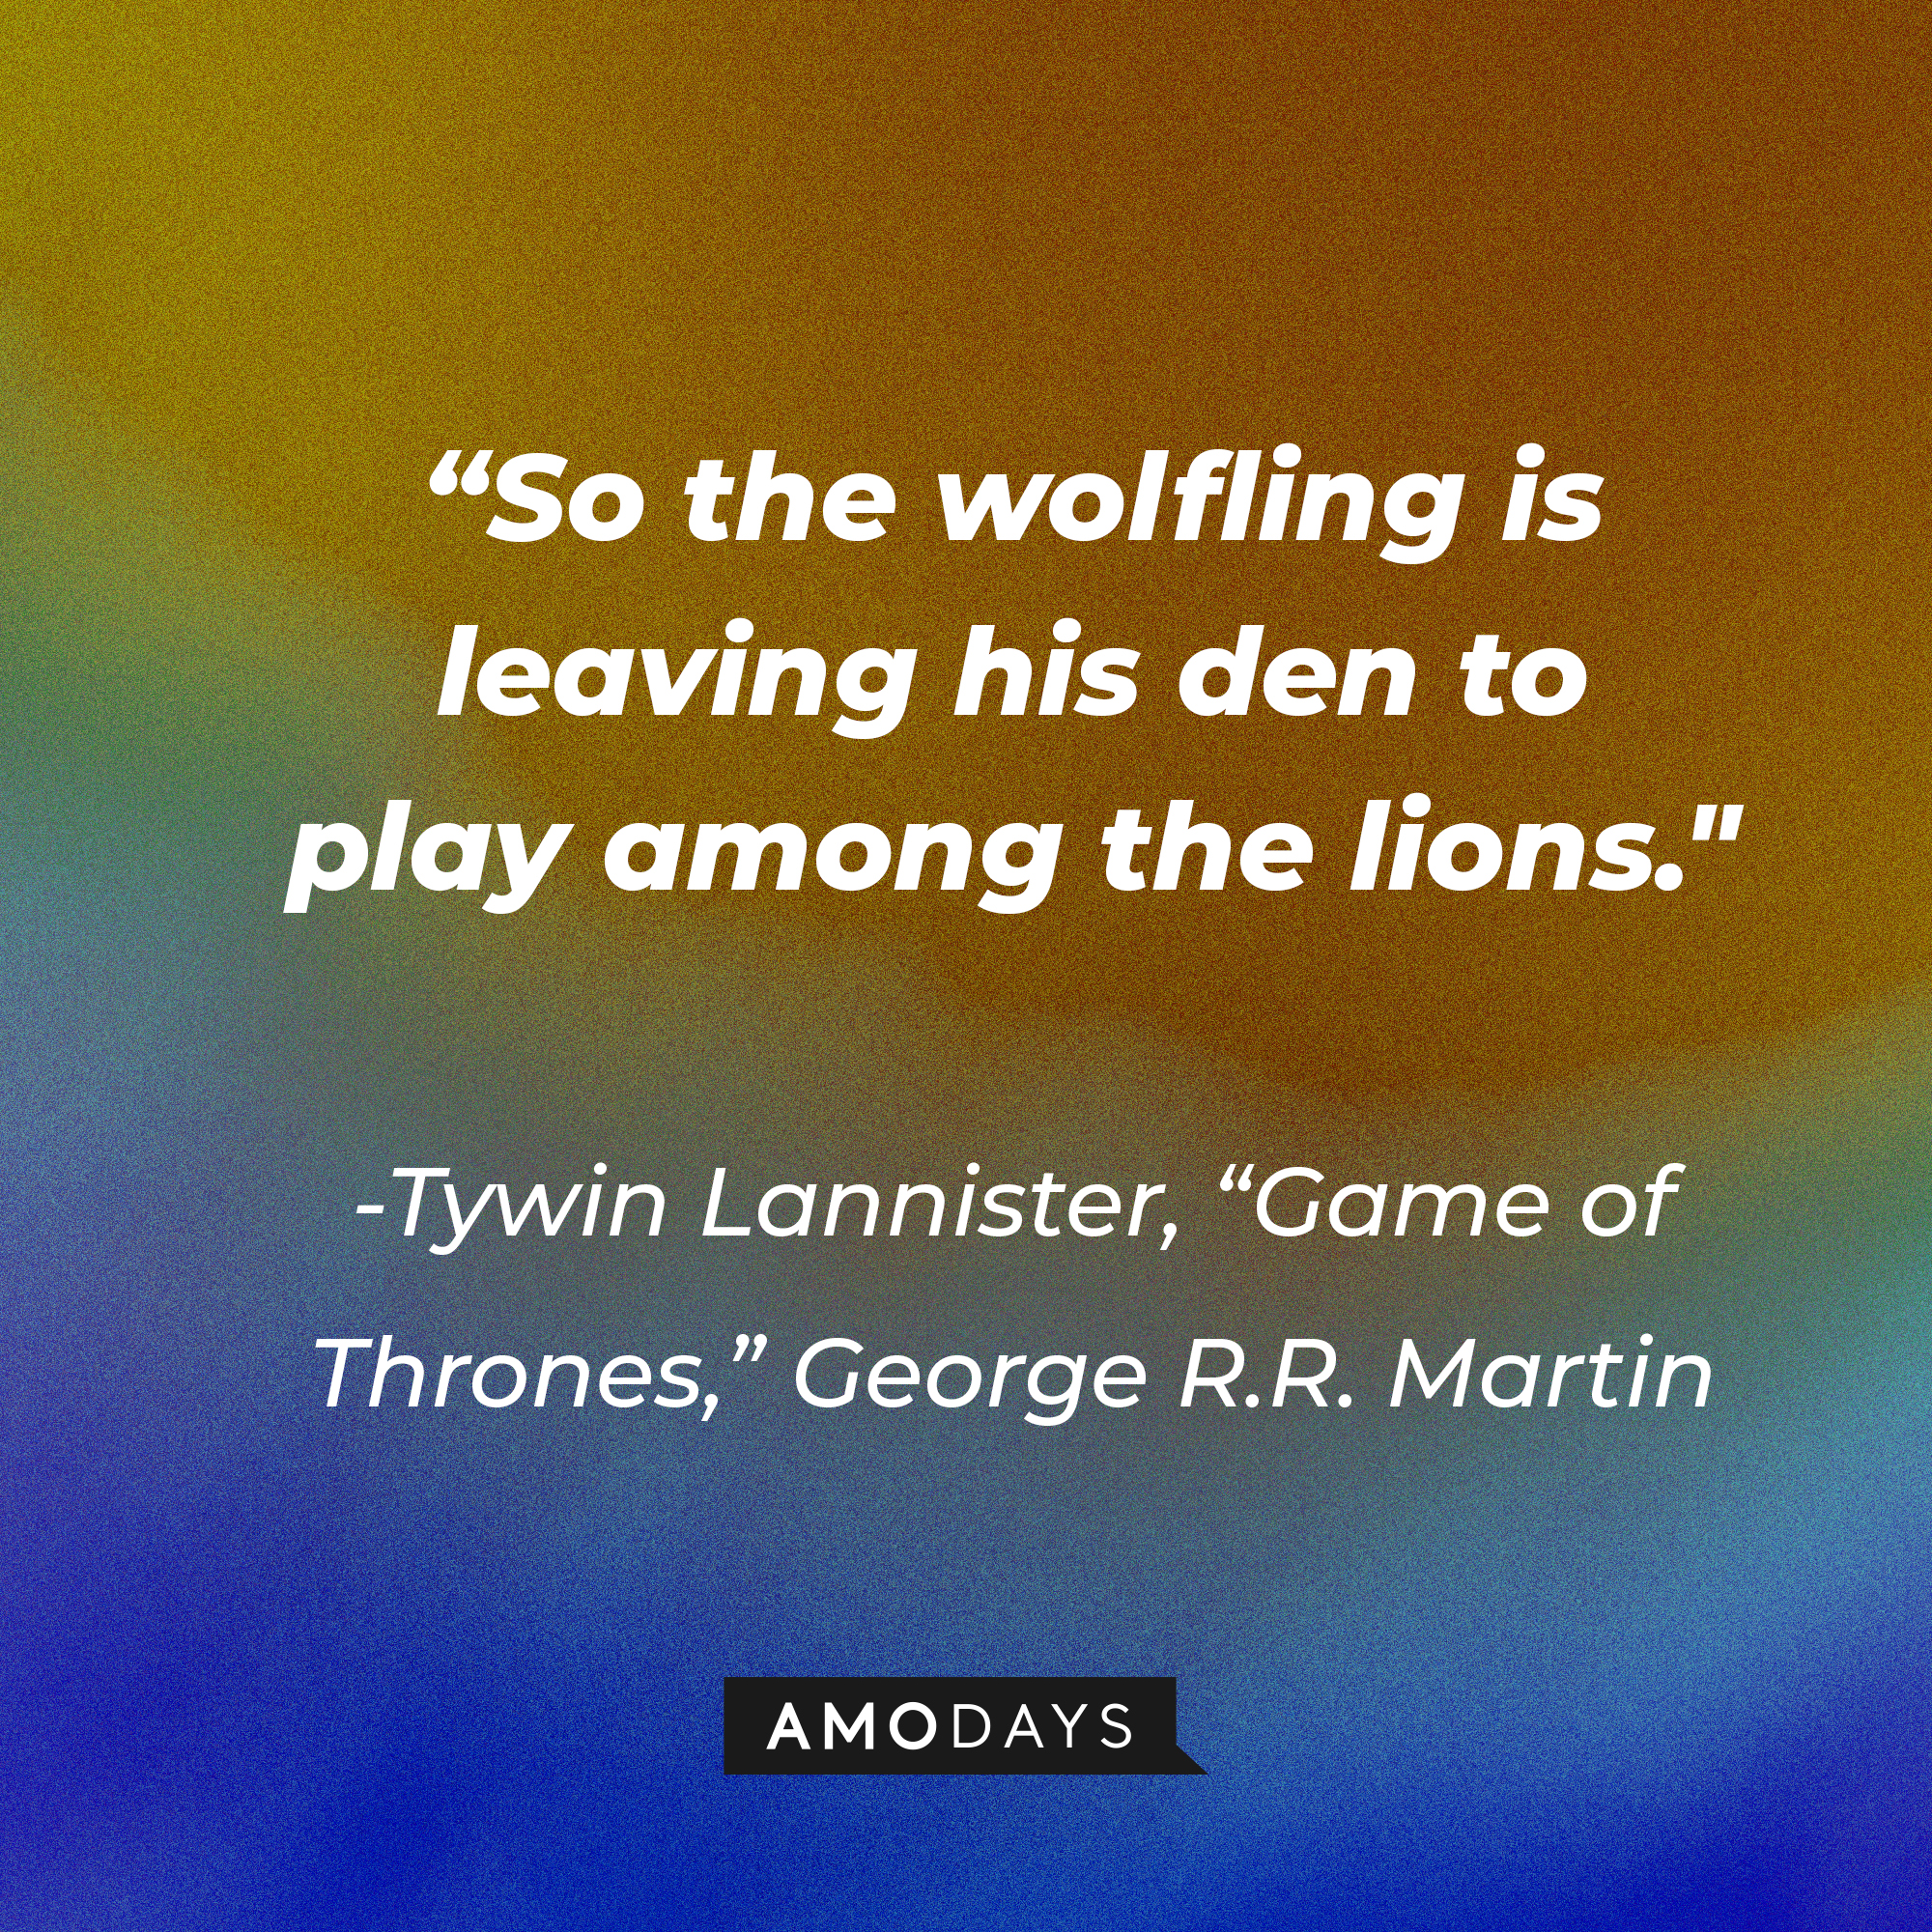 Tywin Lannister’s quote from George R.R. Martin's "Game of Thrones": “So the wolfling is leaving his den to play among the lions." | Source: AmoDays